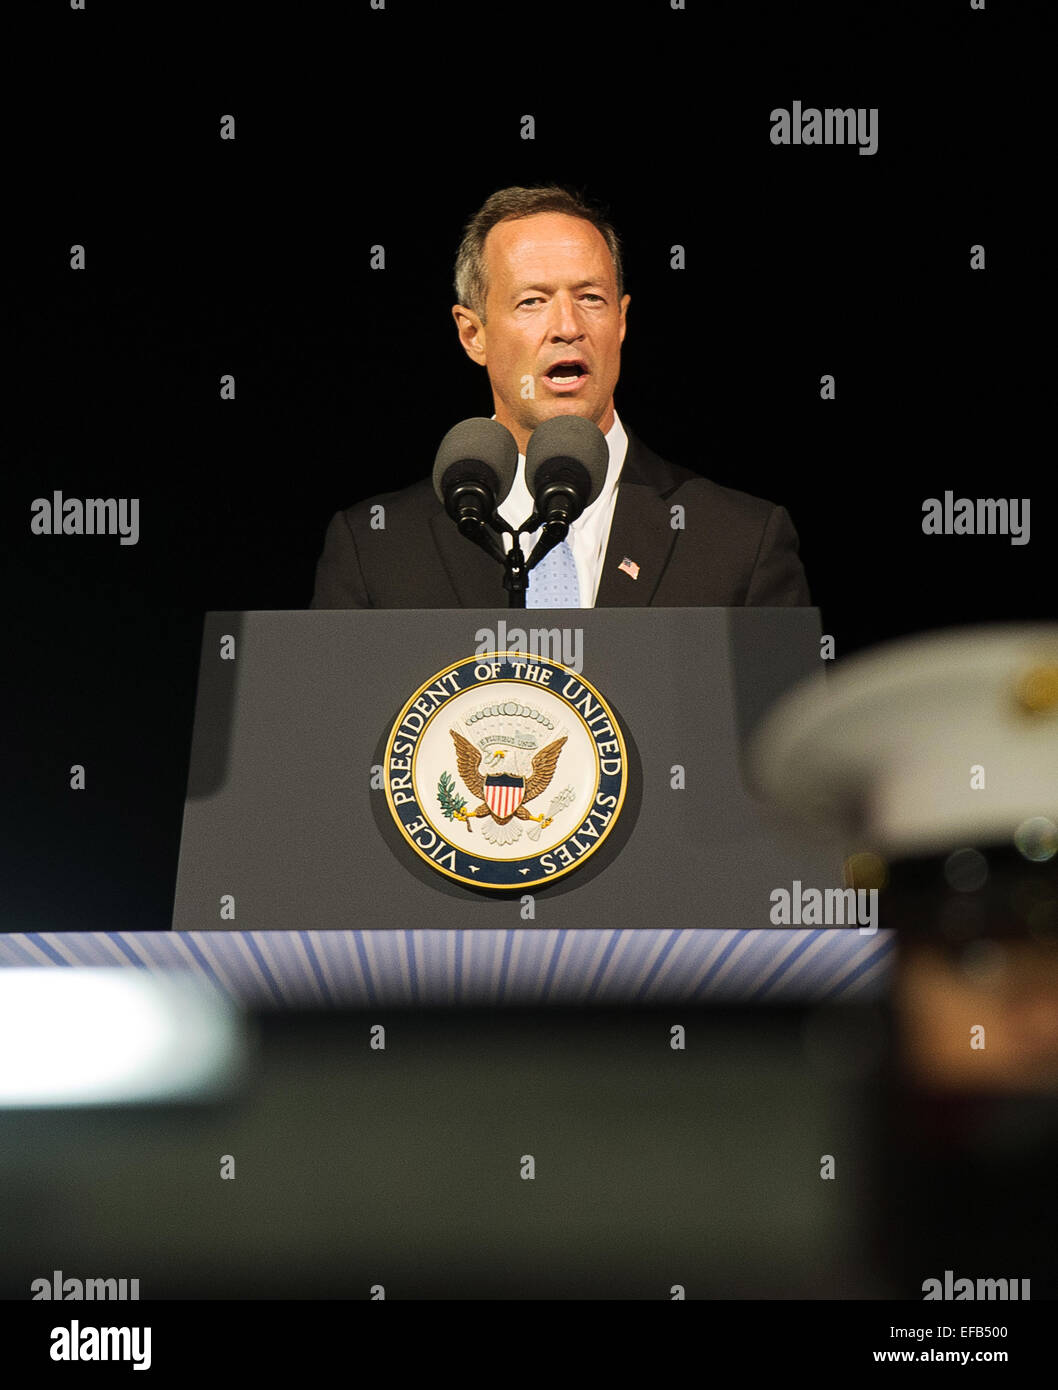 Governor Martin O'Malley speaks during the Star Spangled Spectacular event celebrating the 200th anniversary of the National Anthem September 14, 2014 in Baltimore, Maryland. Maryland is where Francis Scott Key wrote the poem Defense of Fort McHenry during the War of 1812, which later became The Star-Spangled Banner anthem. Stock Photo